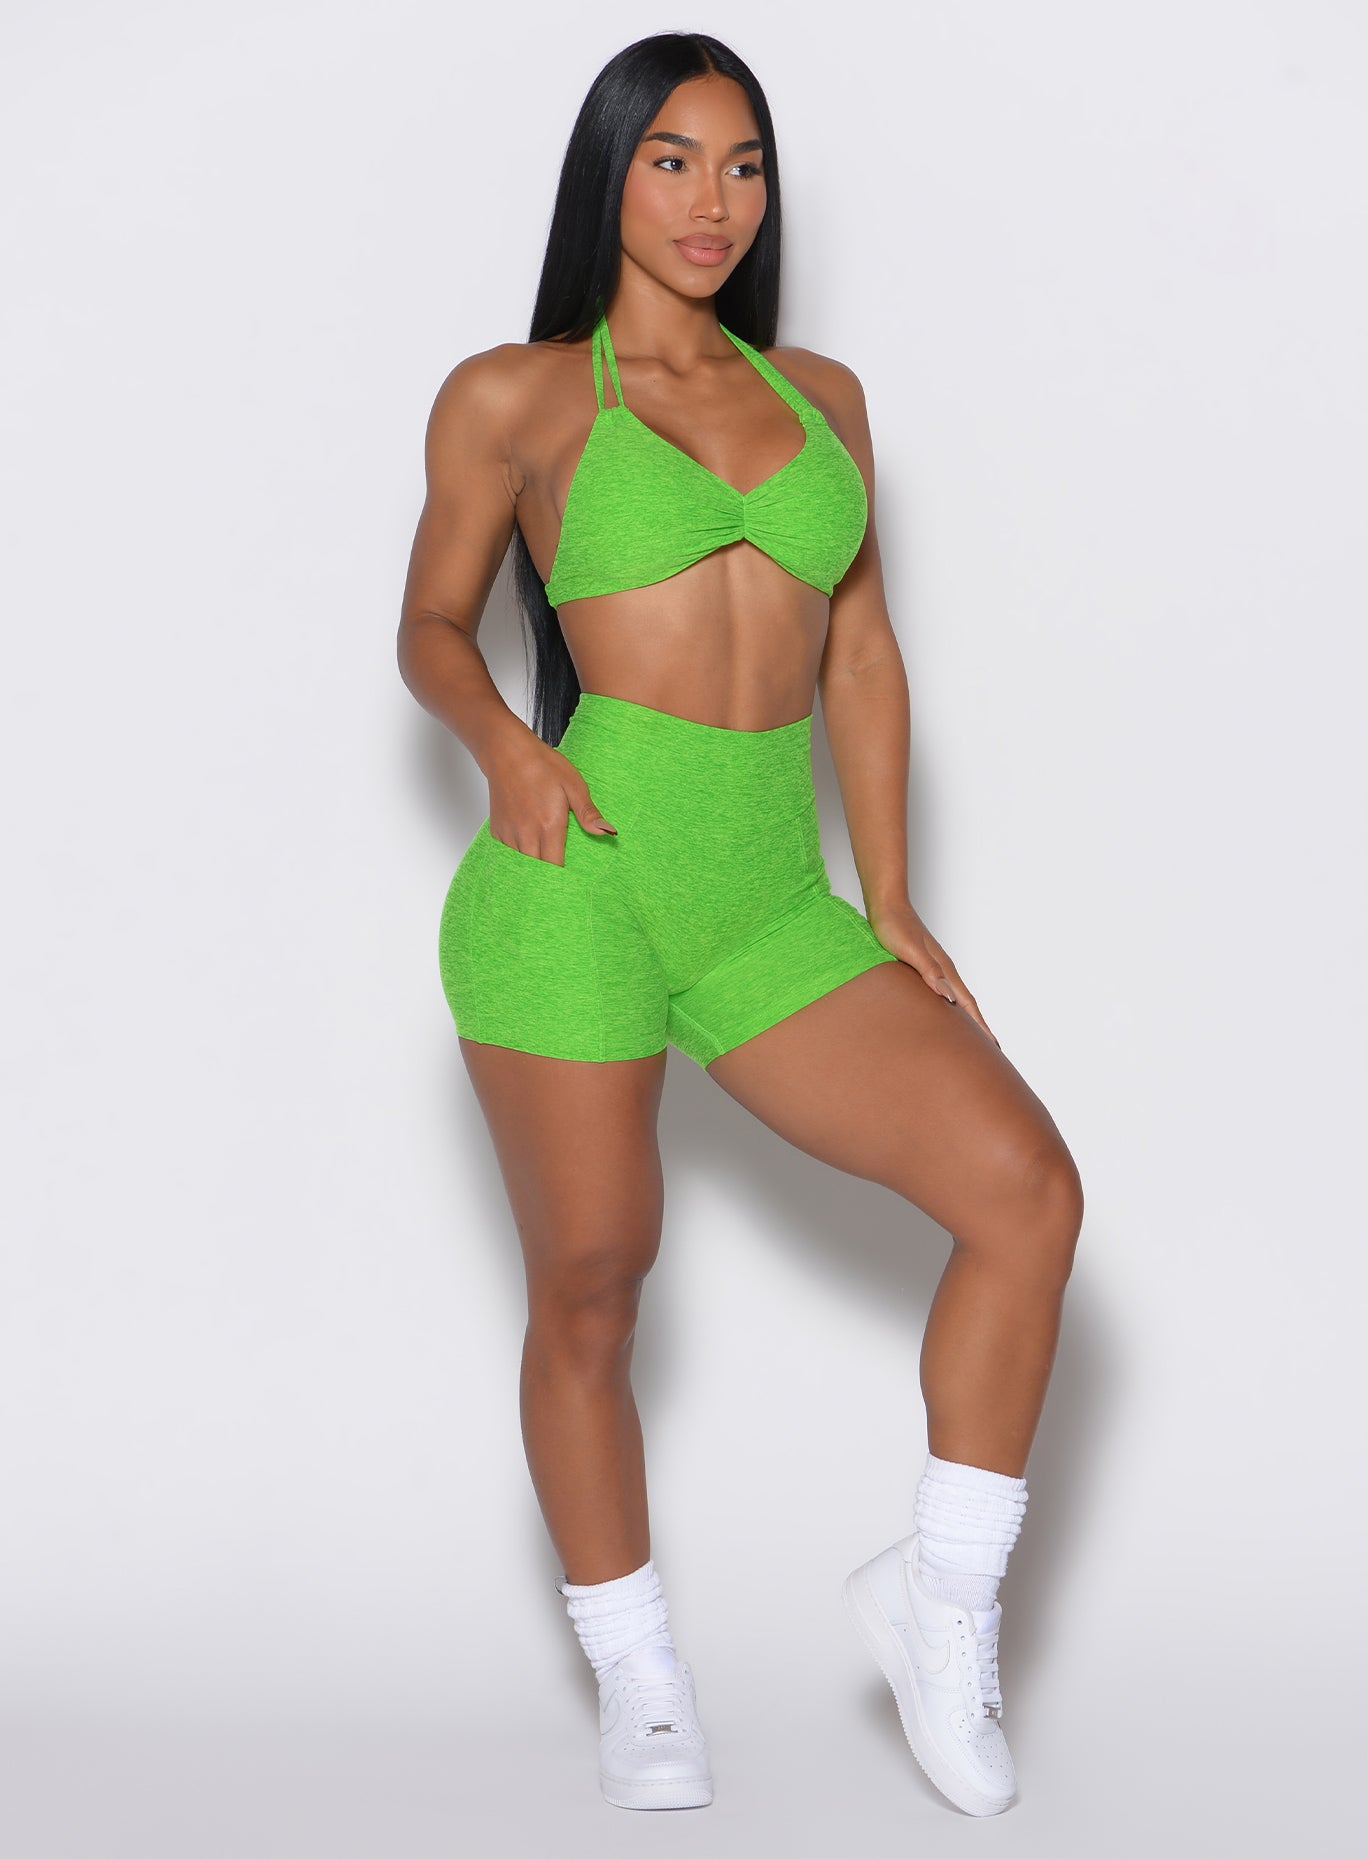 front profile picture of a model wearing our V back shorts in Neon Lime Green color along with the matching bra